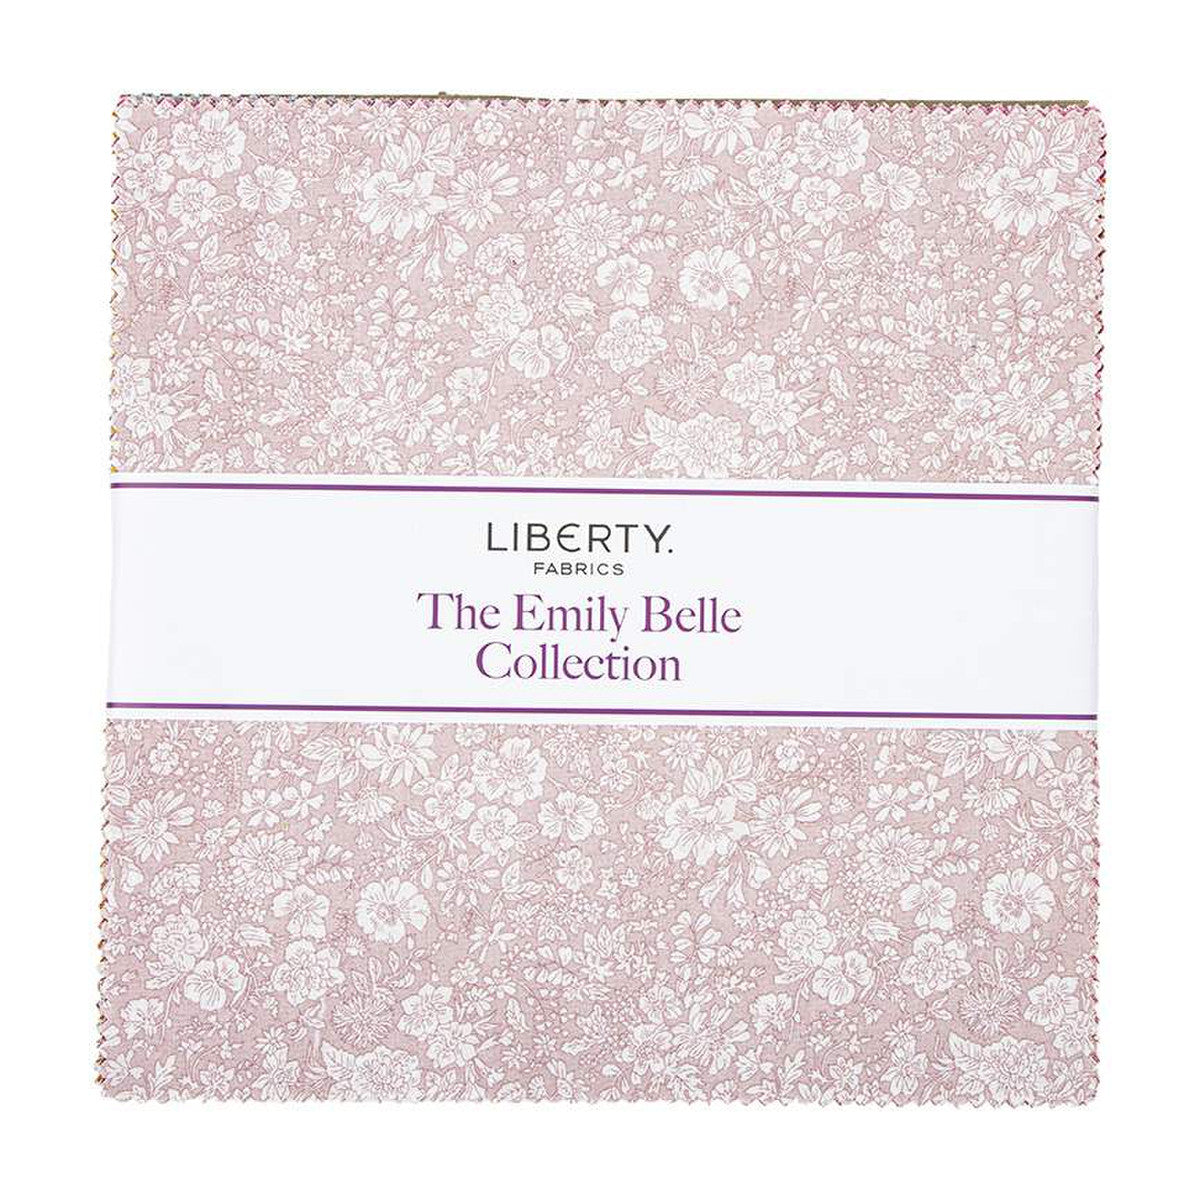 The Emily Belle Collection by Liberty Fabrics